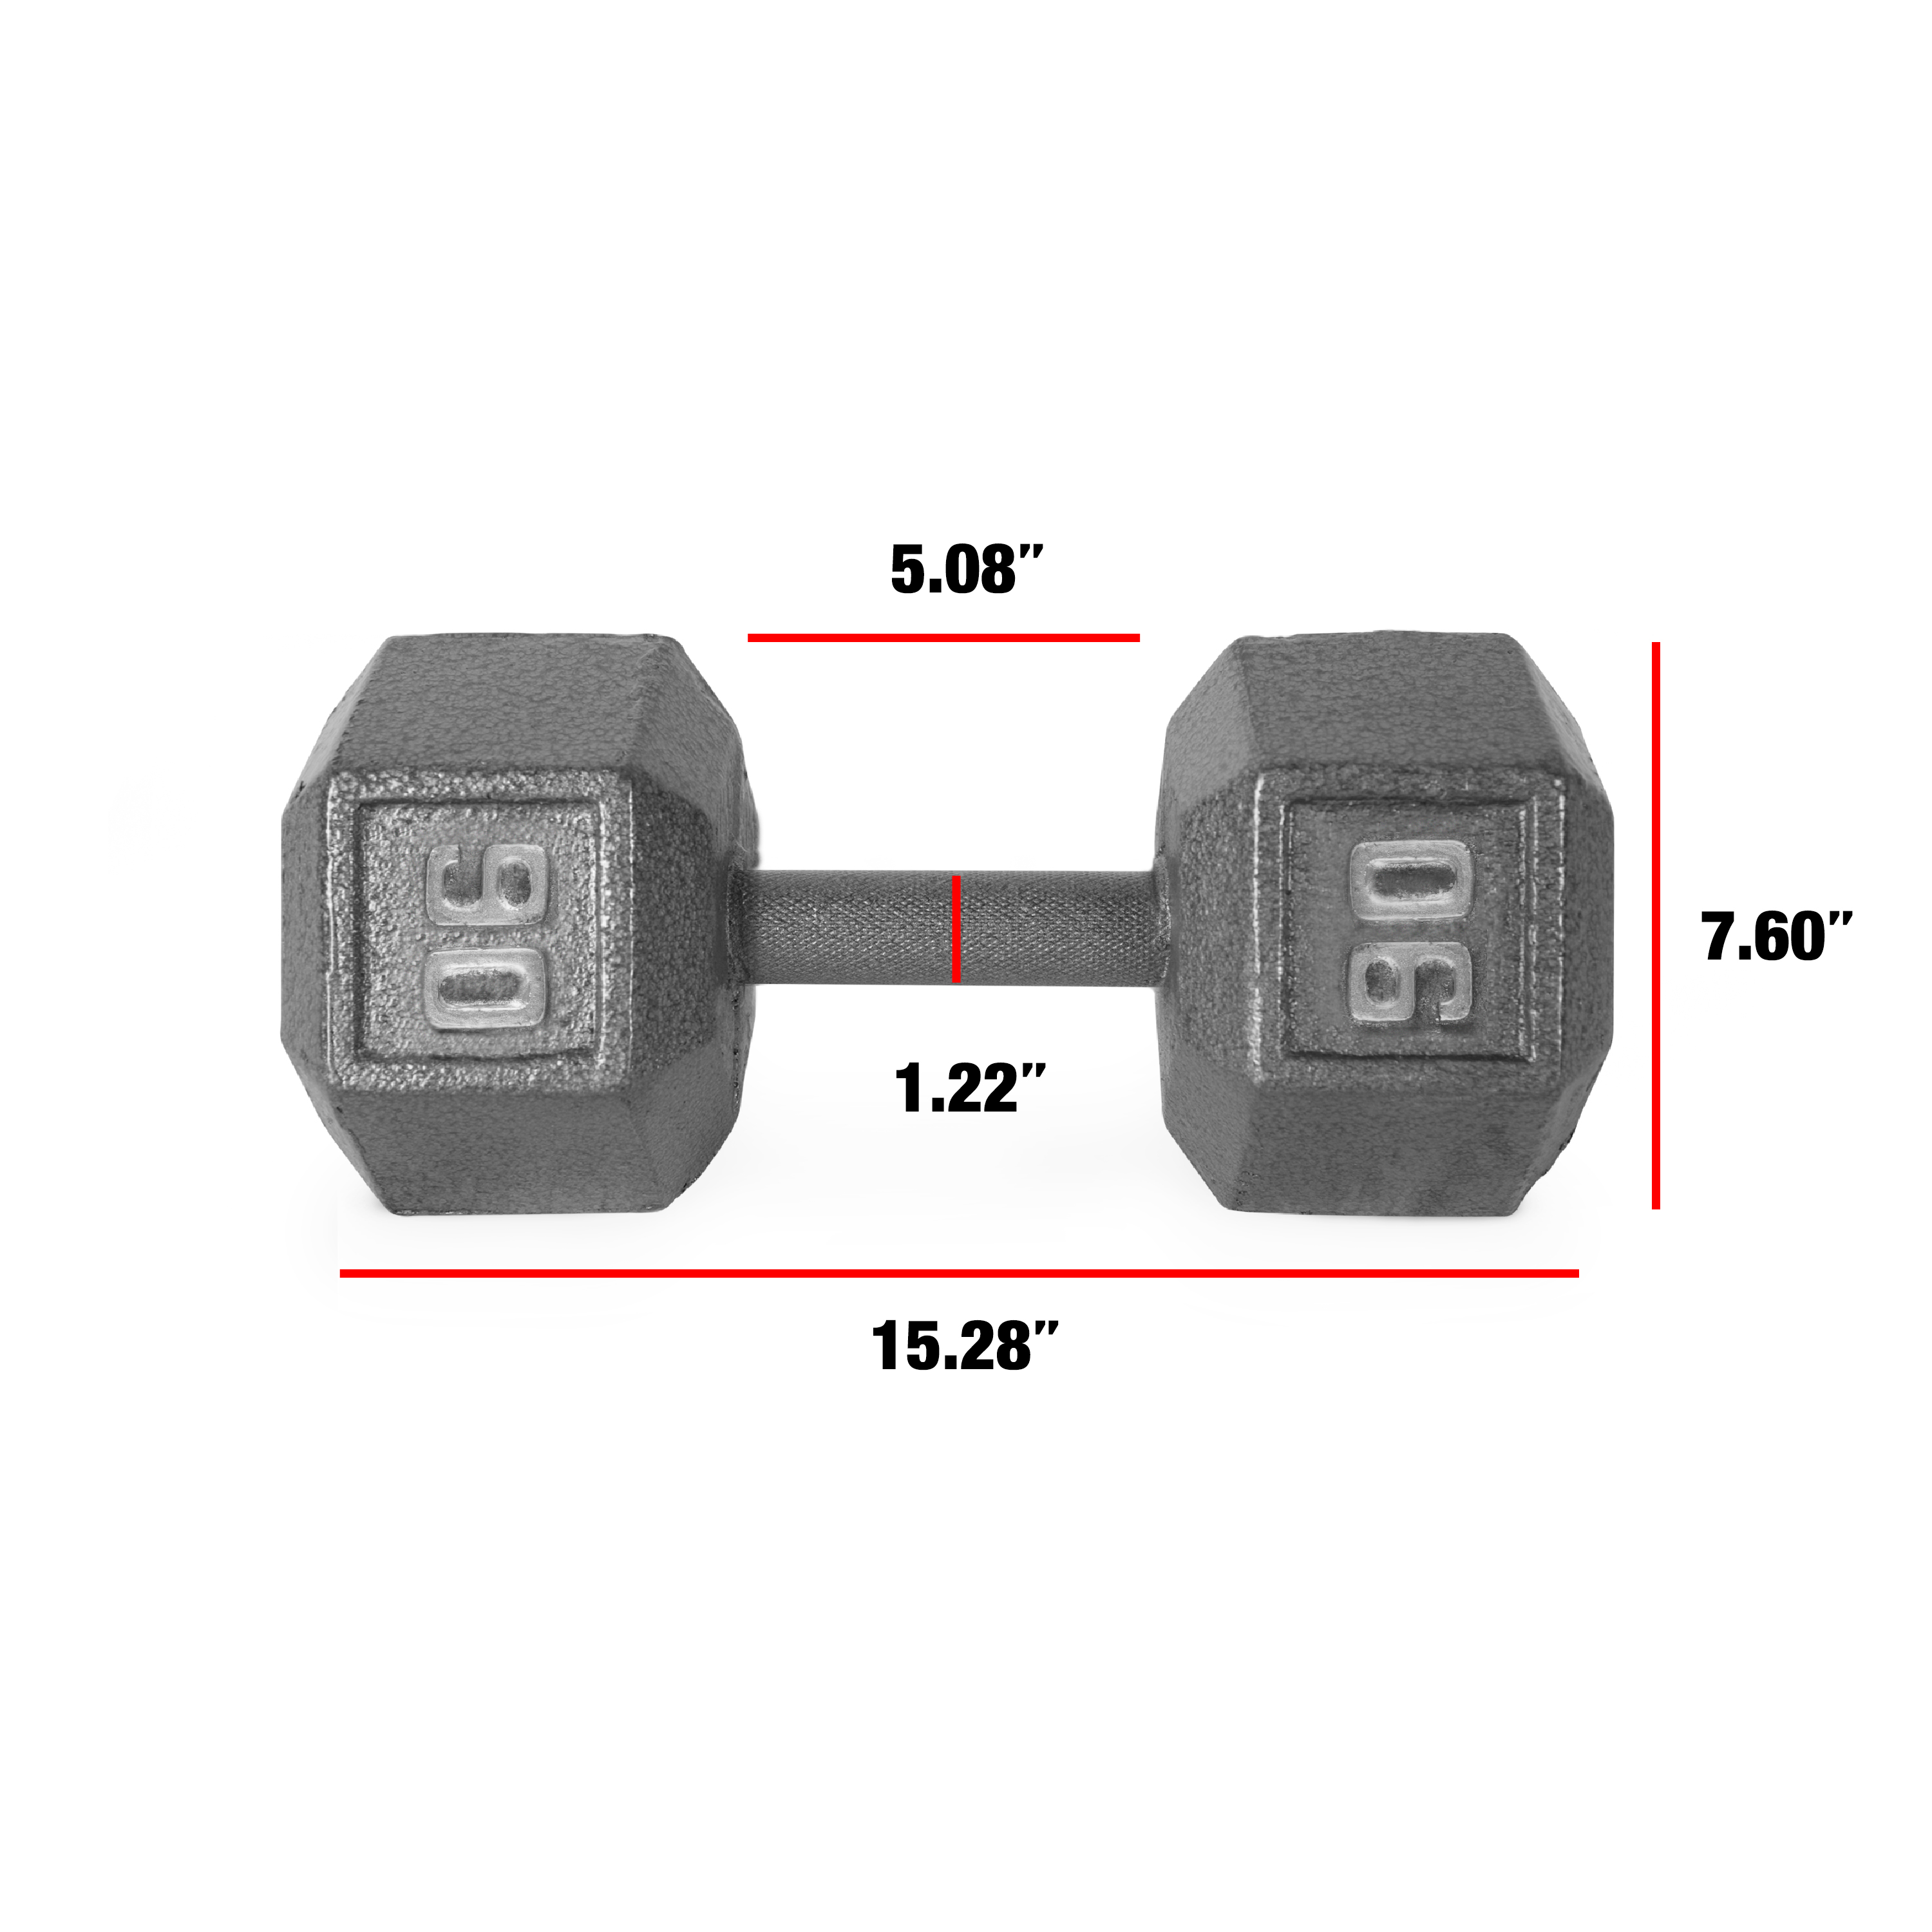 CAP Barbell 90lb Cast Iron Hex Dumbbell, Single - image 4 of 6